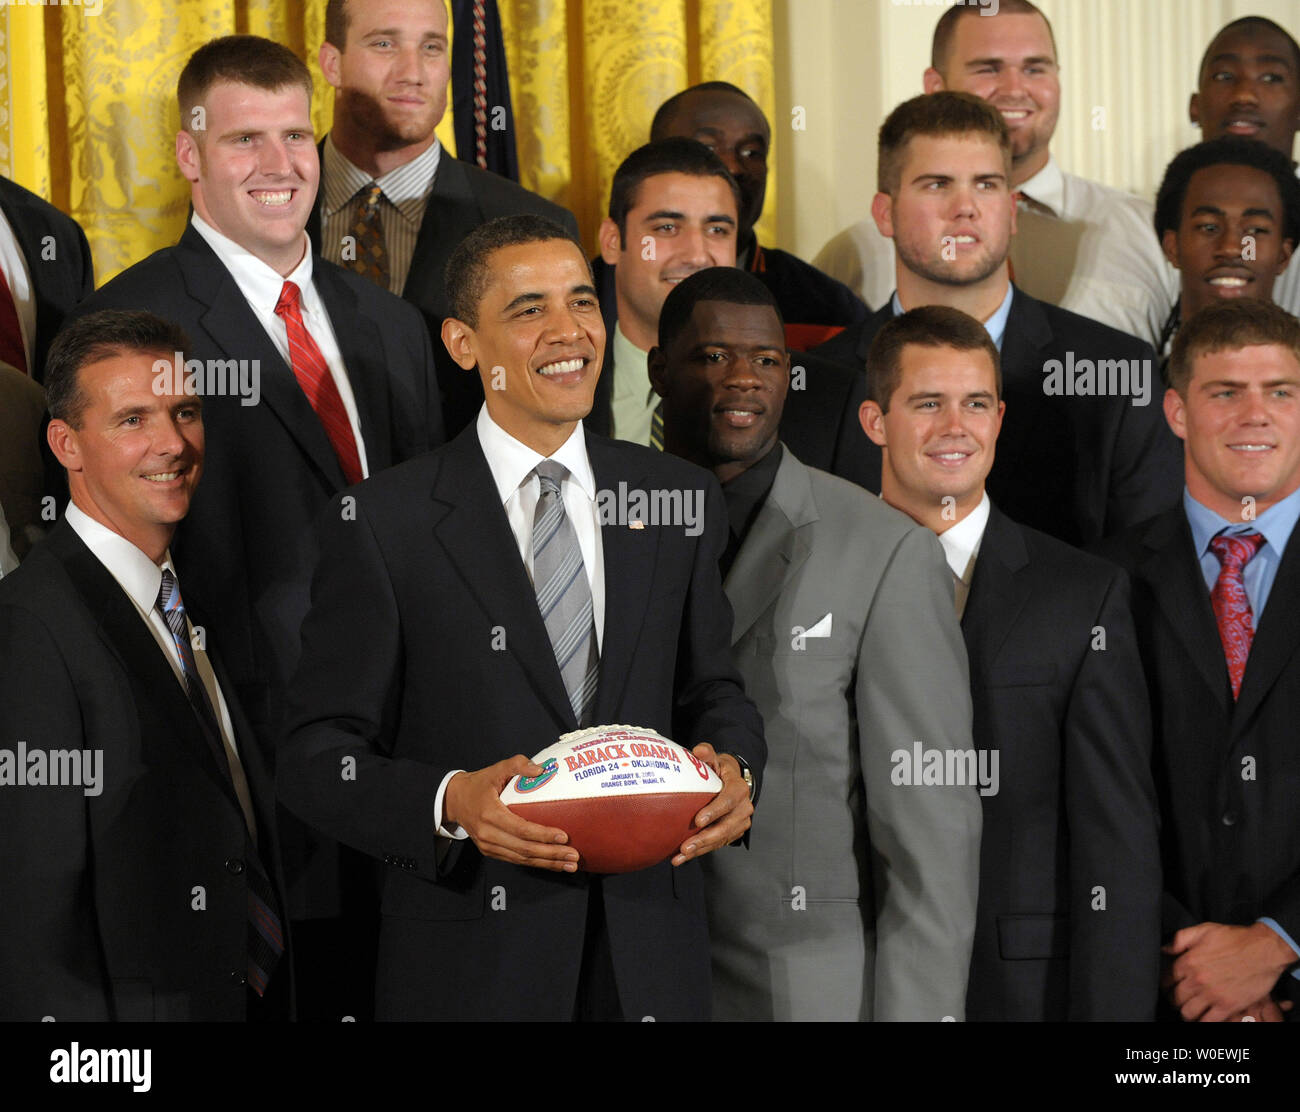 U.S. President Barack Obama stands for a photograph with the University of Florida Gators football team, who won the 2009 BCS National Championship, in the East Room of the White House in Washington on April 23, 2009.    (UPI Photo/Roger L. Wollenberg) Stock Photo